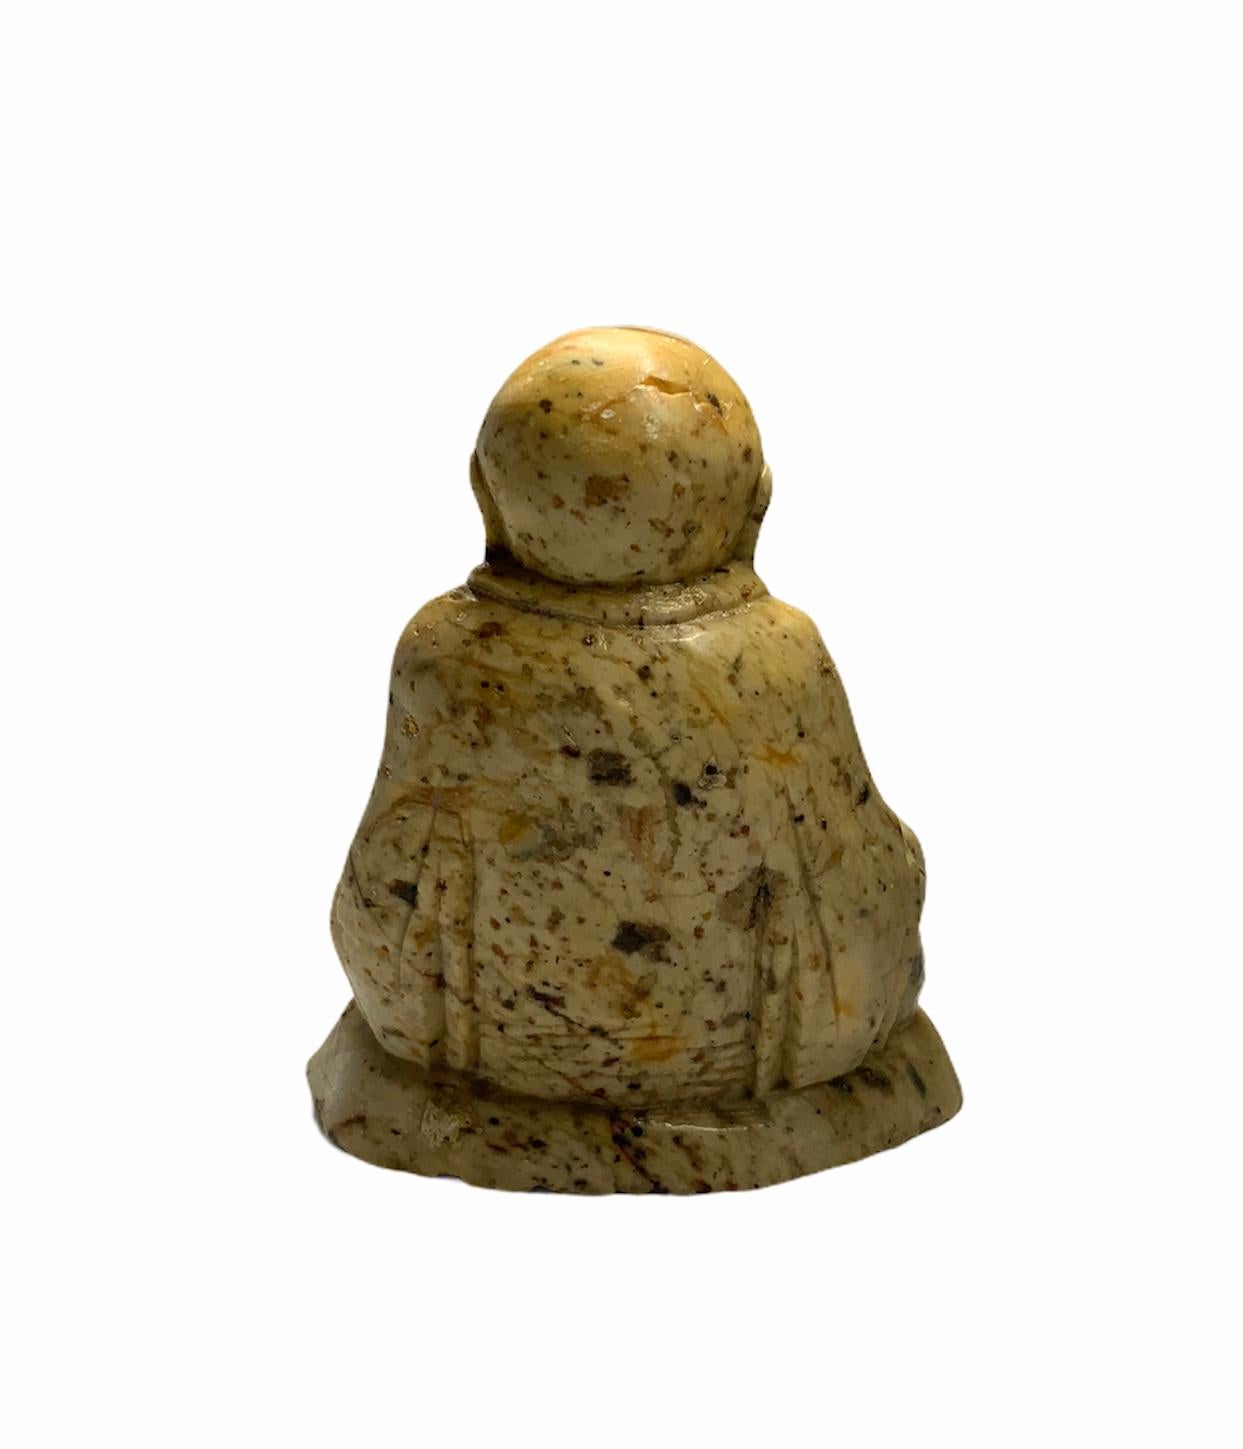 This a heavy carved light yellow-green soapstone Buddha seated over an oval stone base with bracket feet.